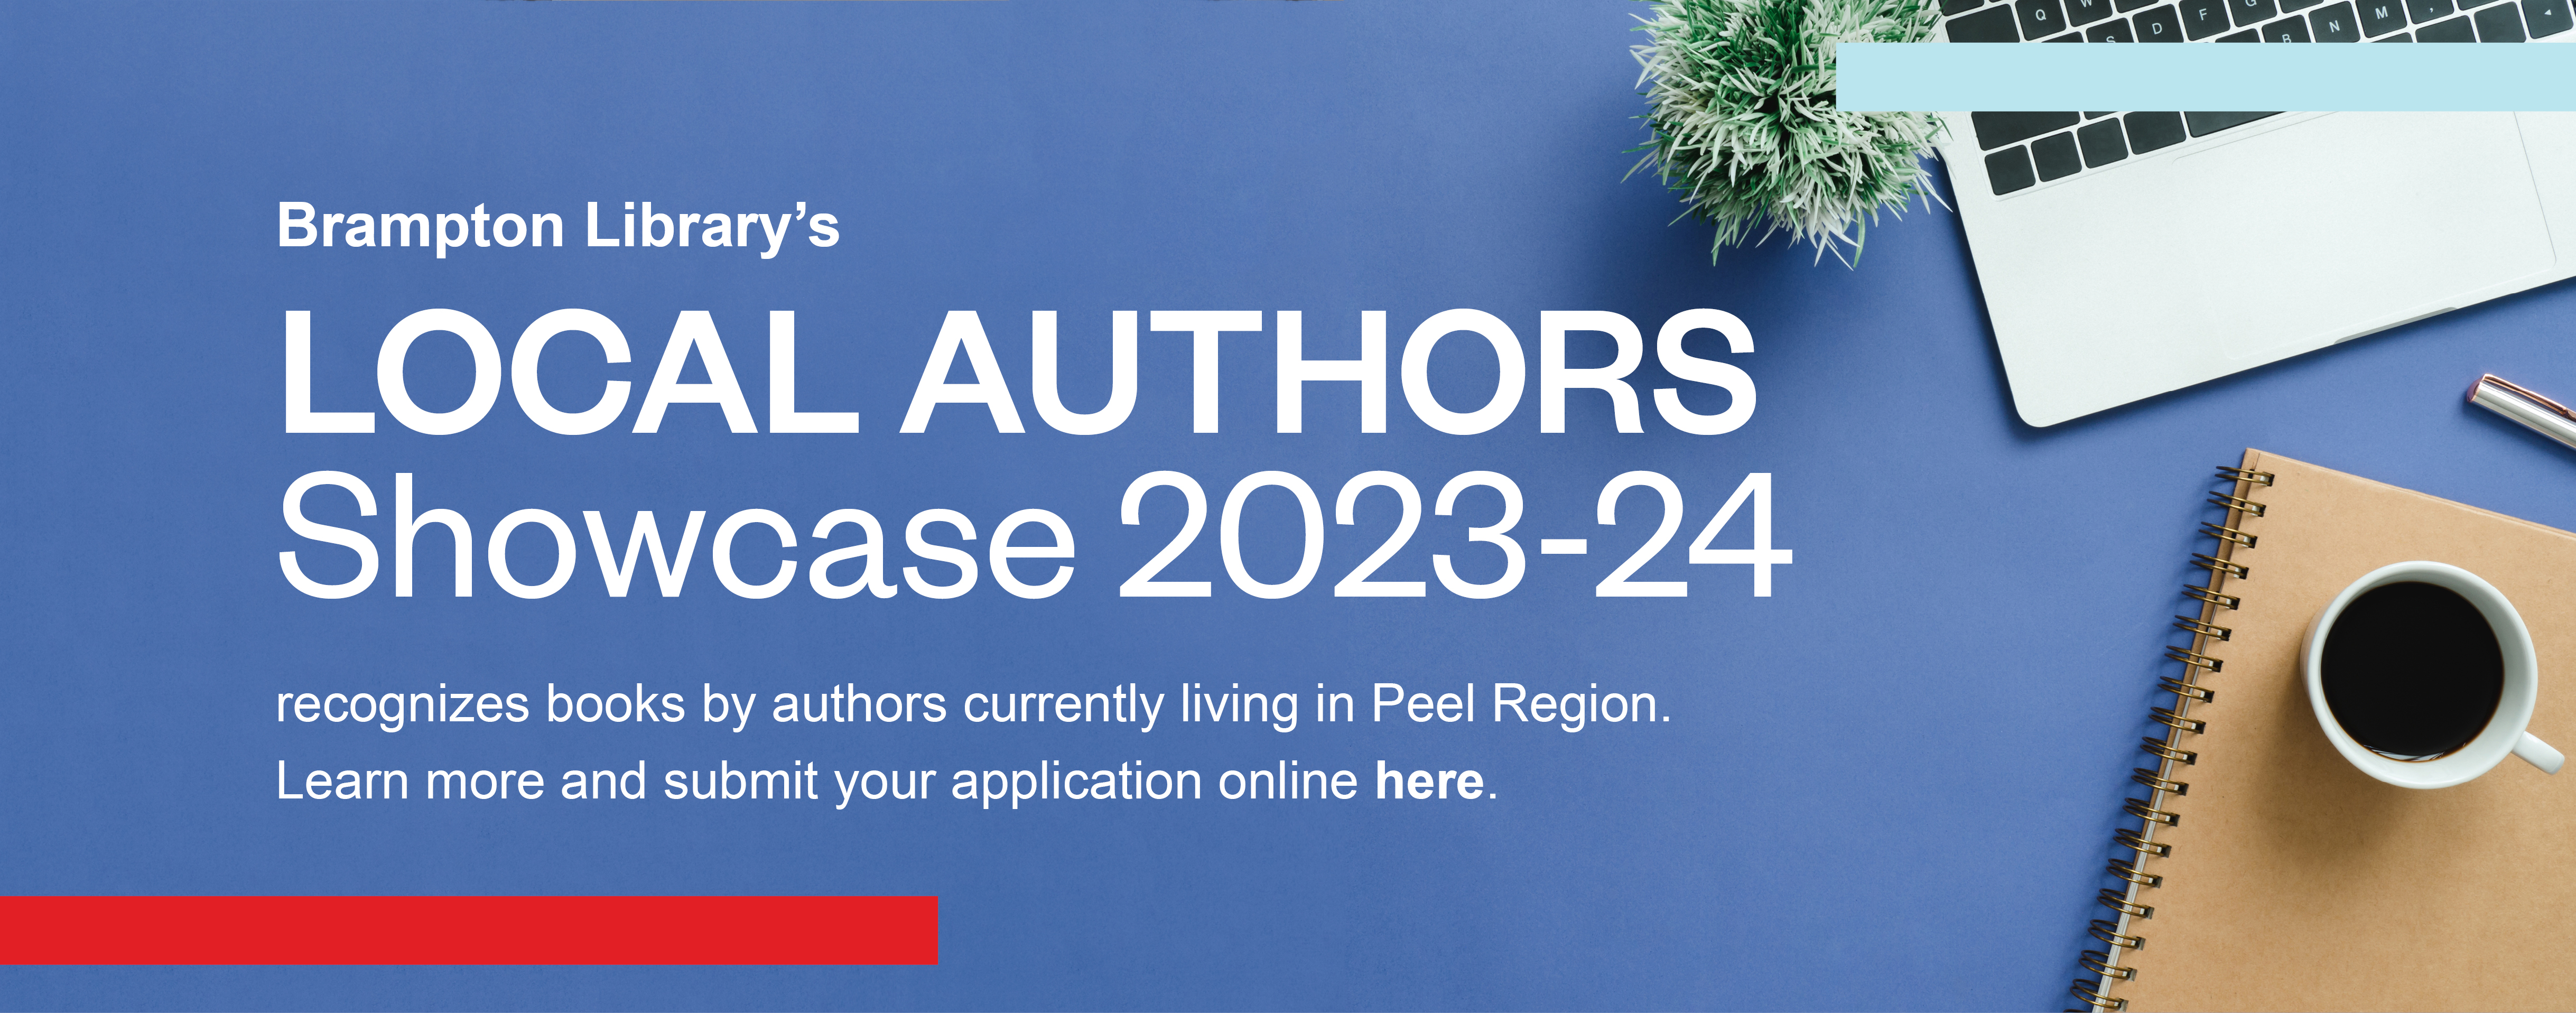 Brampton Library Local Authors Showcase 2023 - 2024 Submissions are now open. Click to learn more.